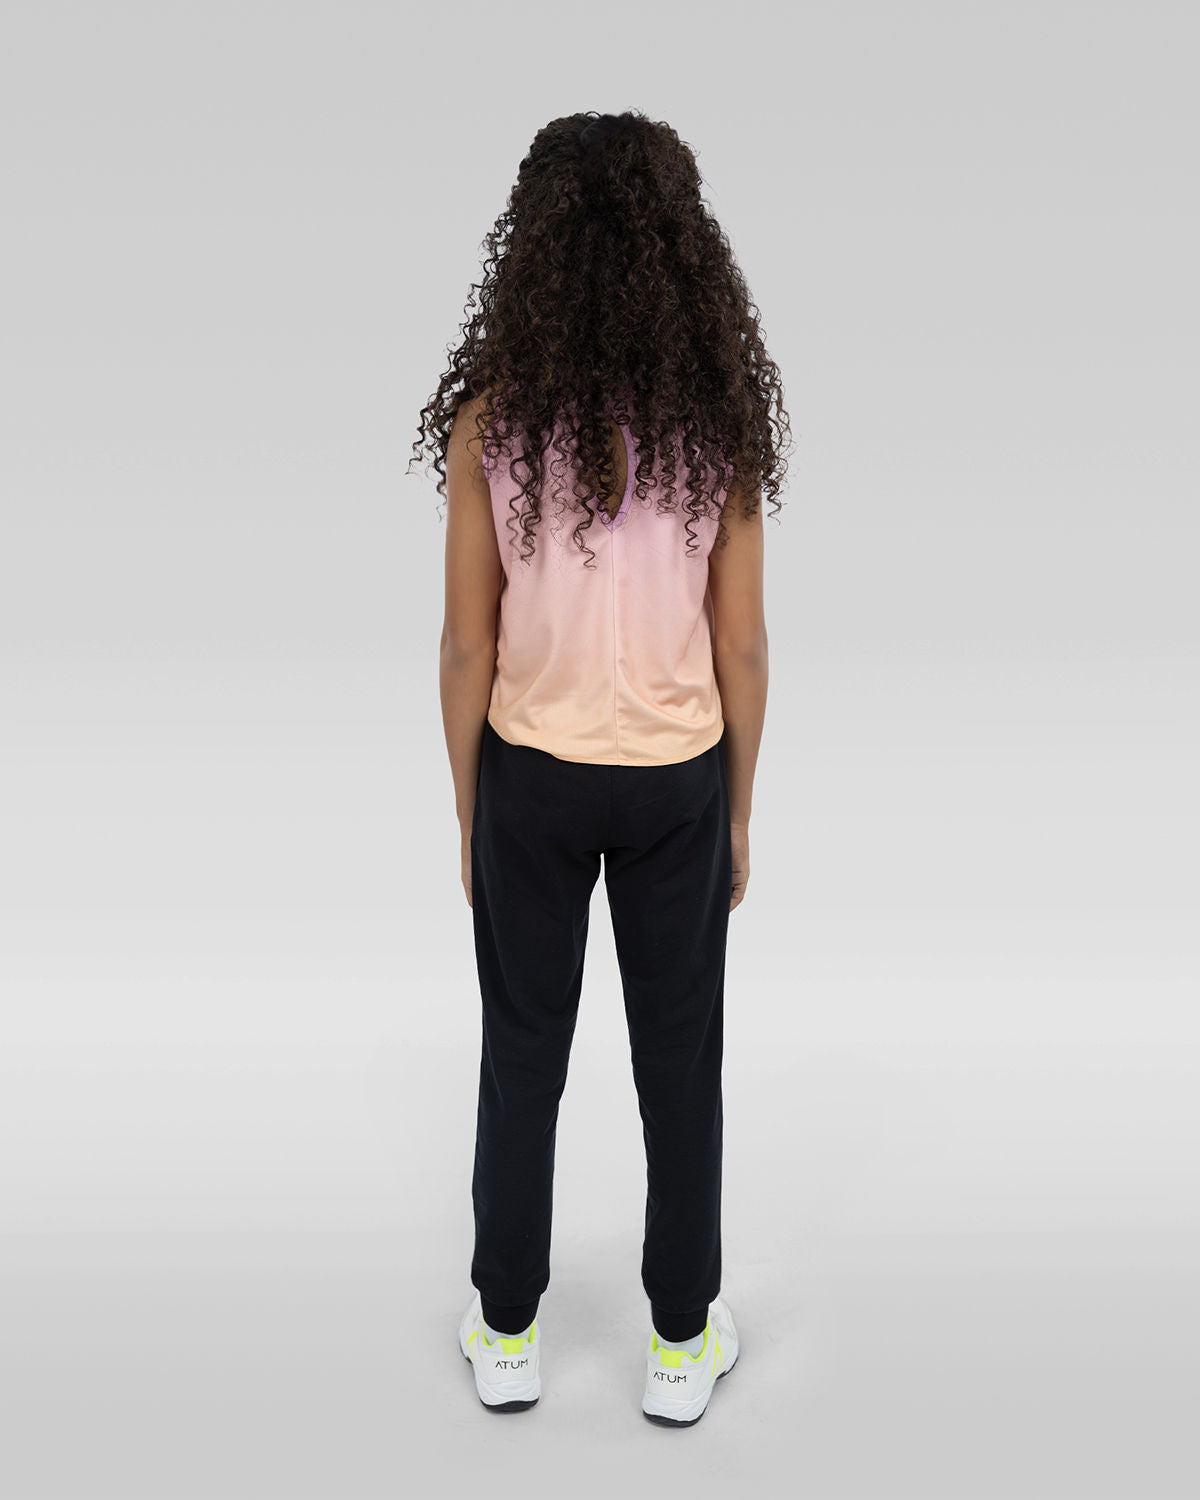 Simple and smooth girls sweatpants - Atum Egypt #